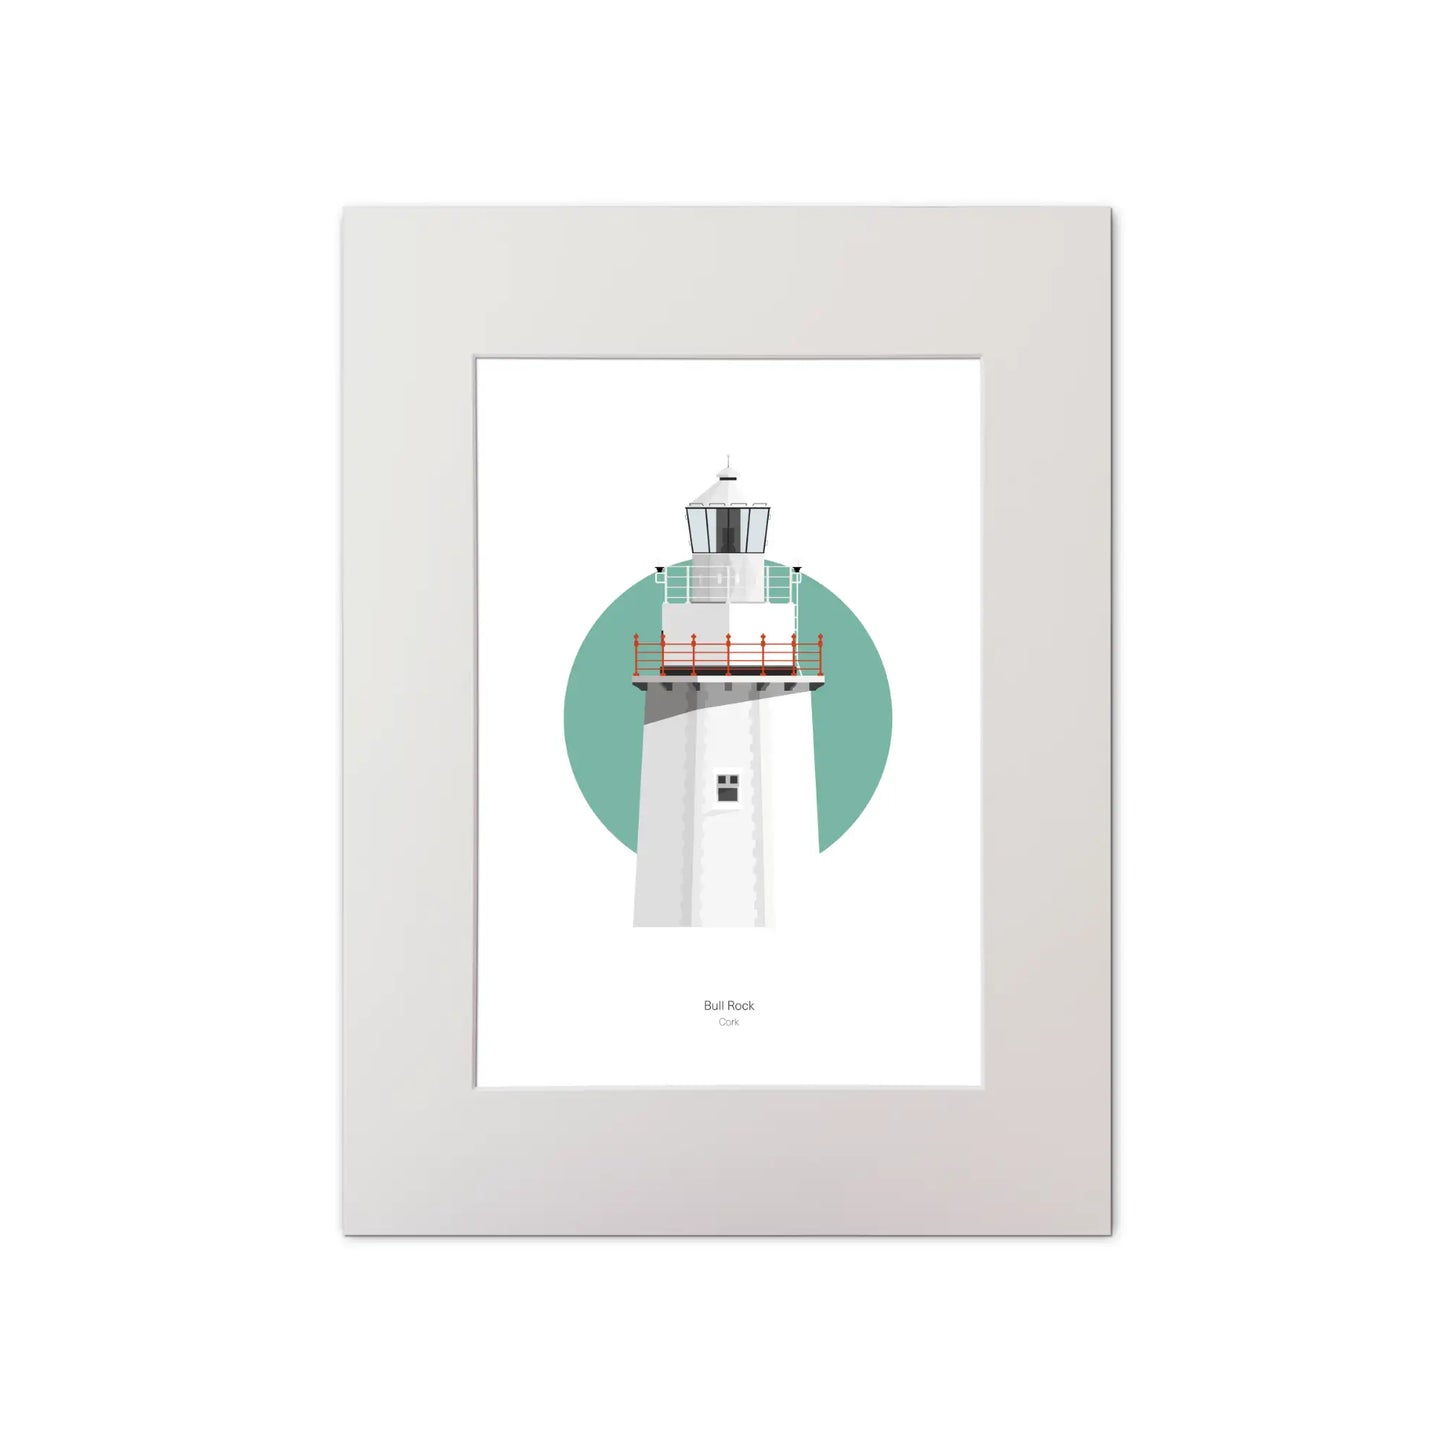 Illustration of Bull Rock lighthouse on a white background inside light blue square, mounted and measuring 30x40cm.